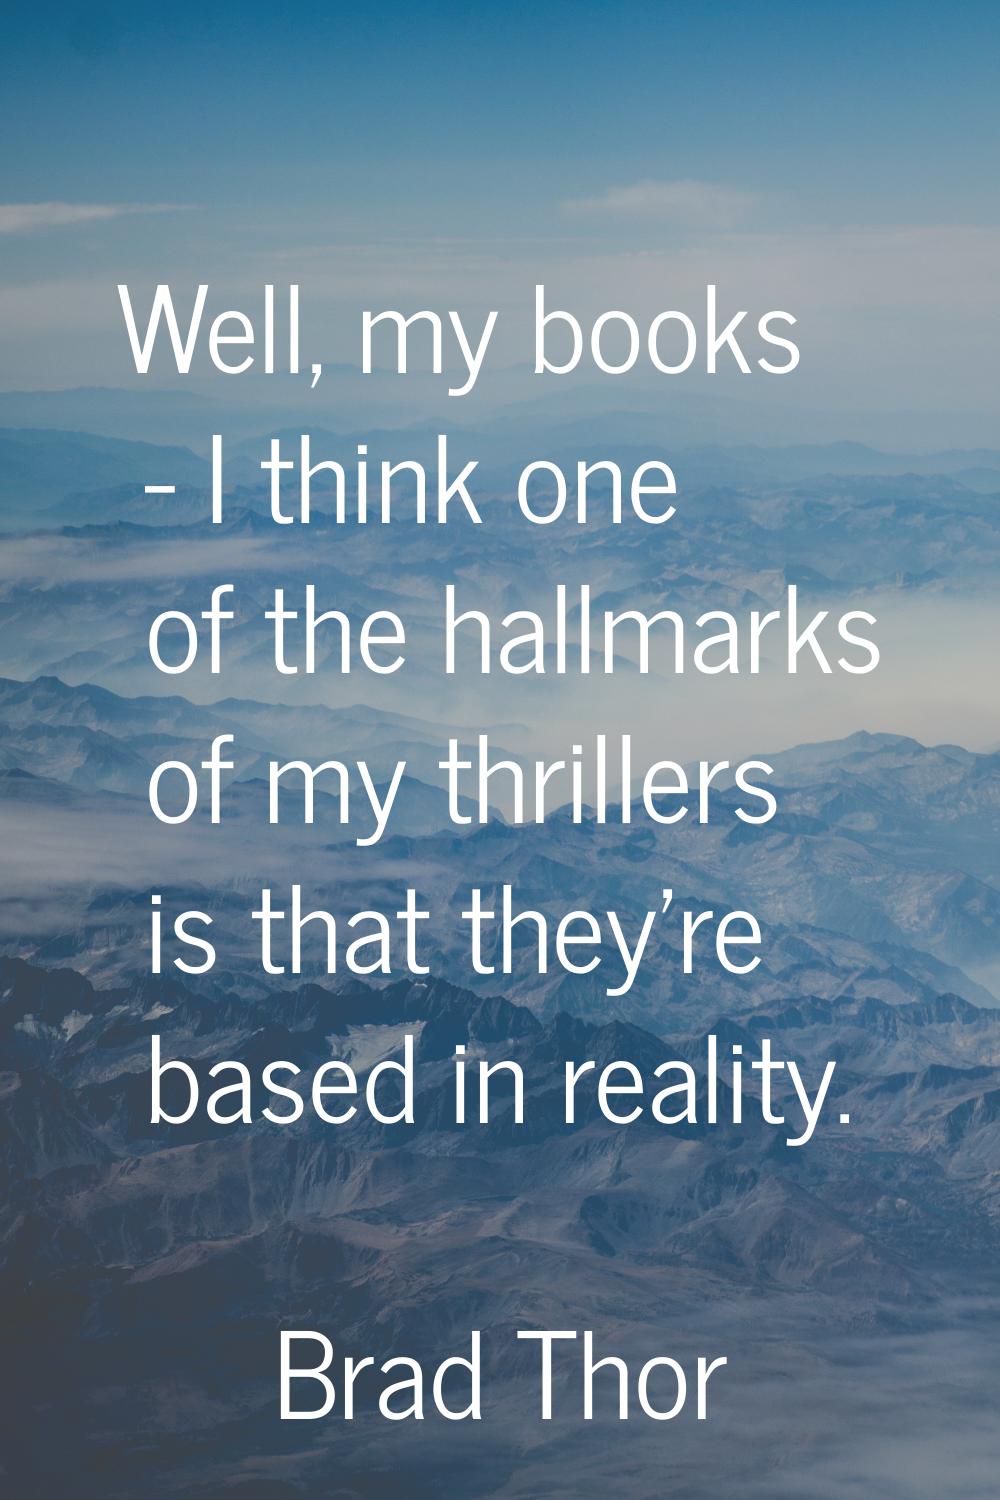 Well, my books - I think one of the hallmarks of my thrillers is that they're based in reality.